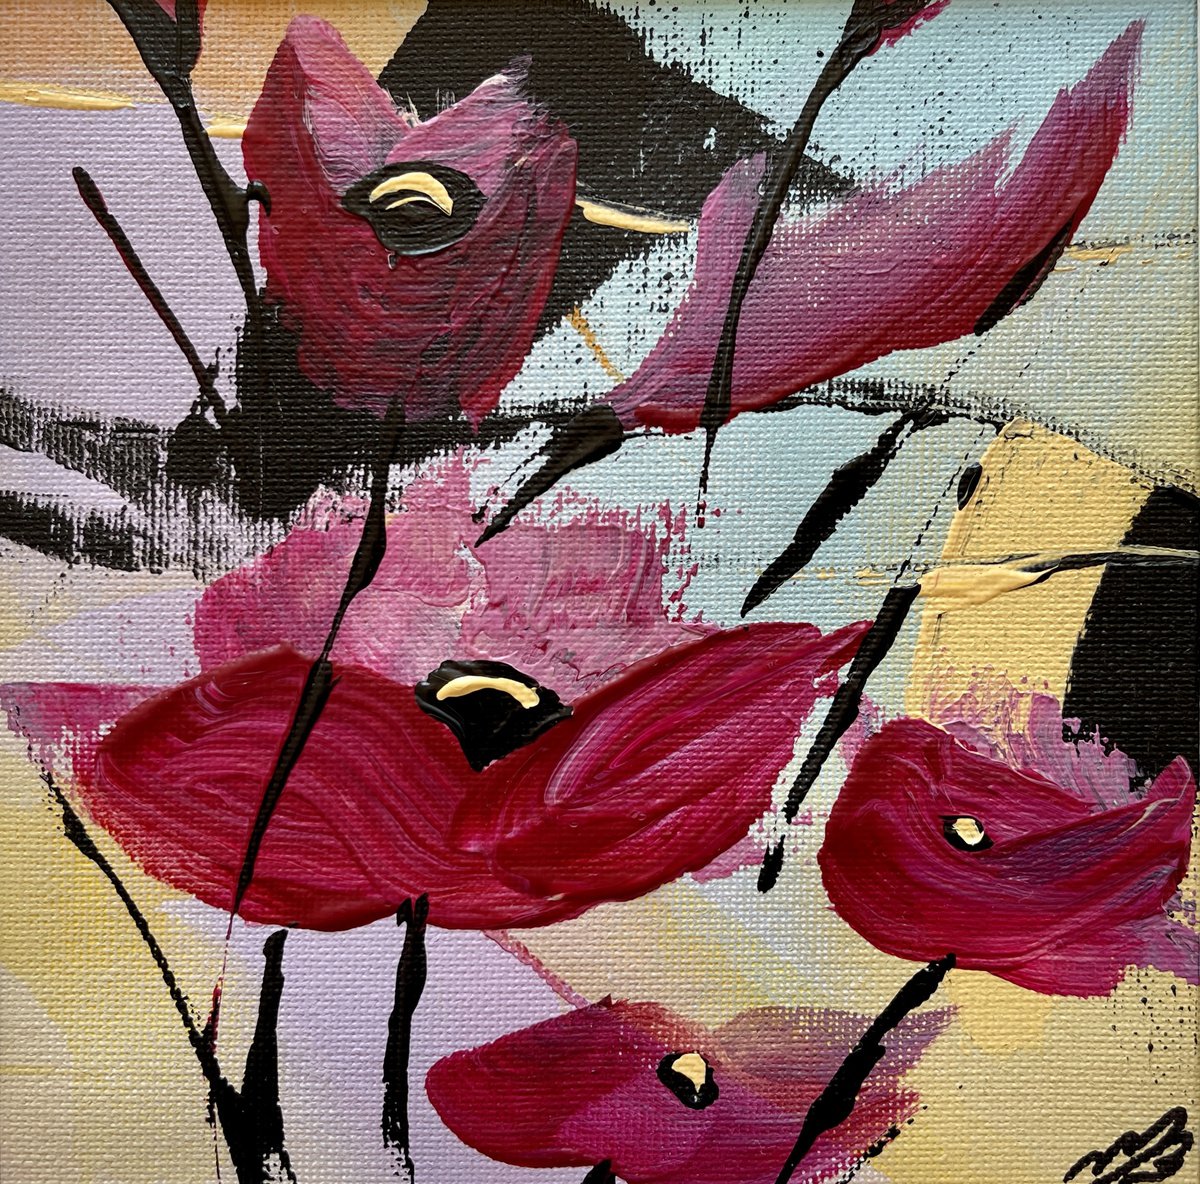 Abstract Poppies in a Mount by Marja Brown